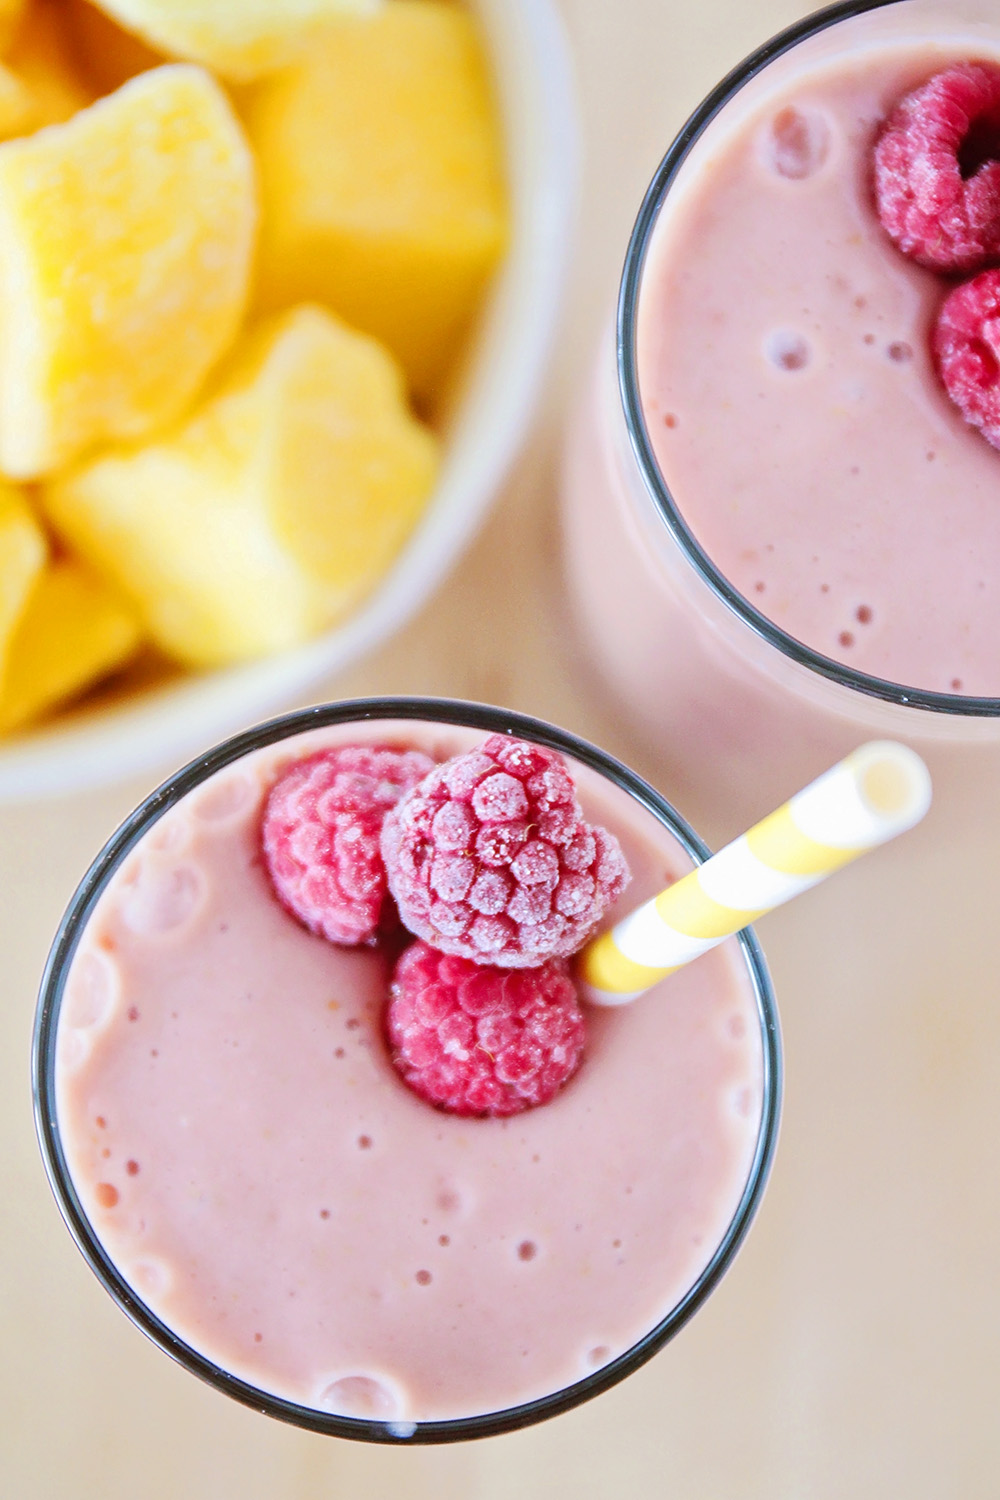 This refreshing and healthy mango raspberry smoothie is the perfect easy breakfast!